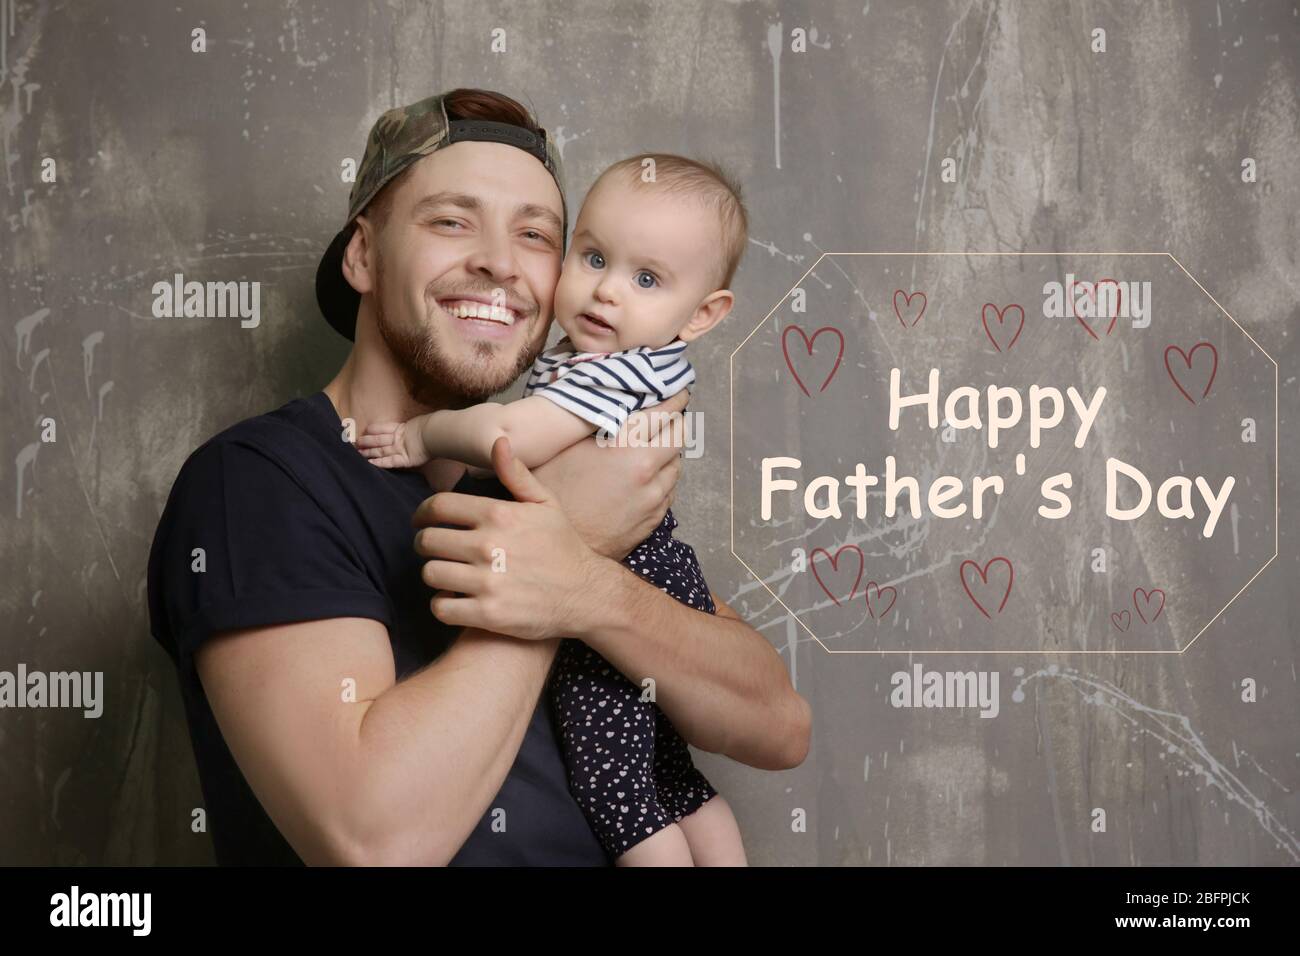 Daddy with cute baby daughter and text HAPPY FATHER'S DAY on grunge background Stock Photo